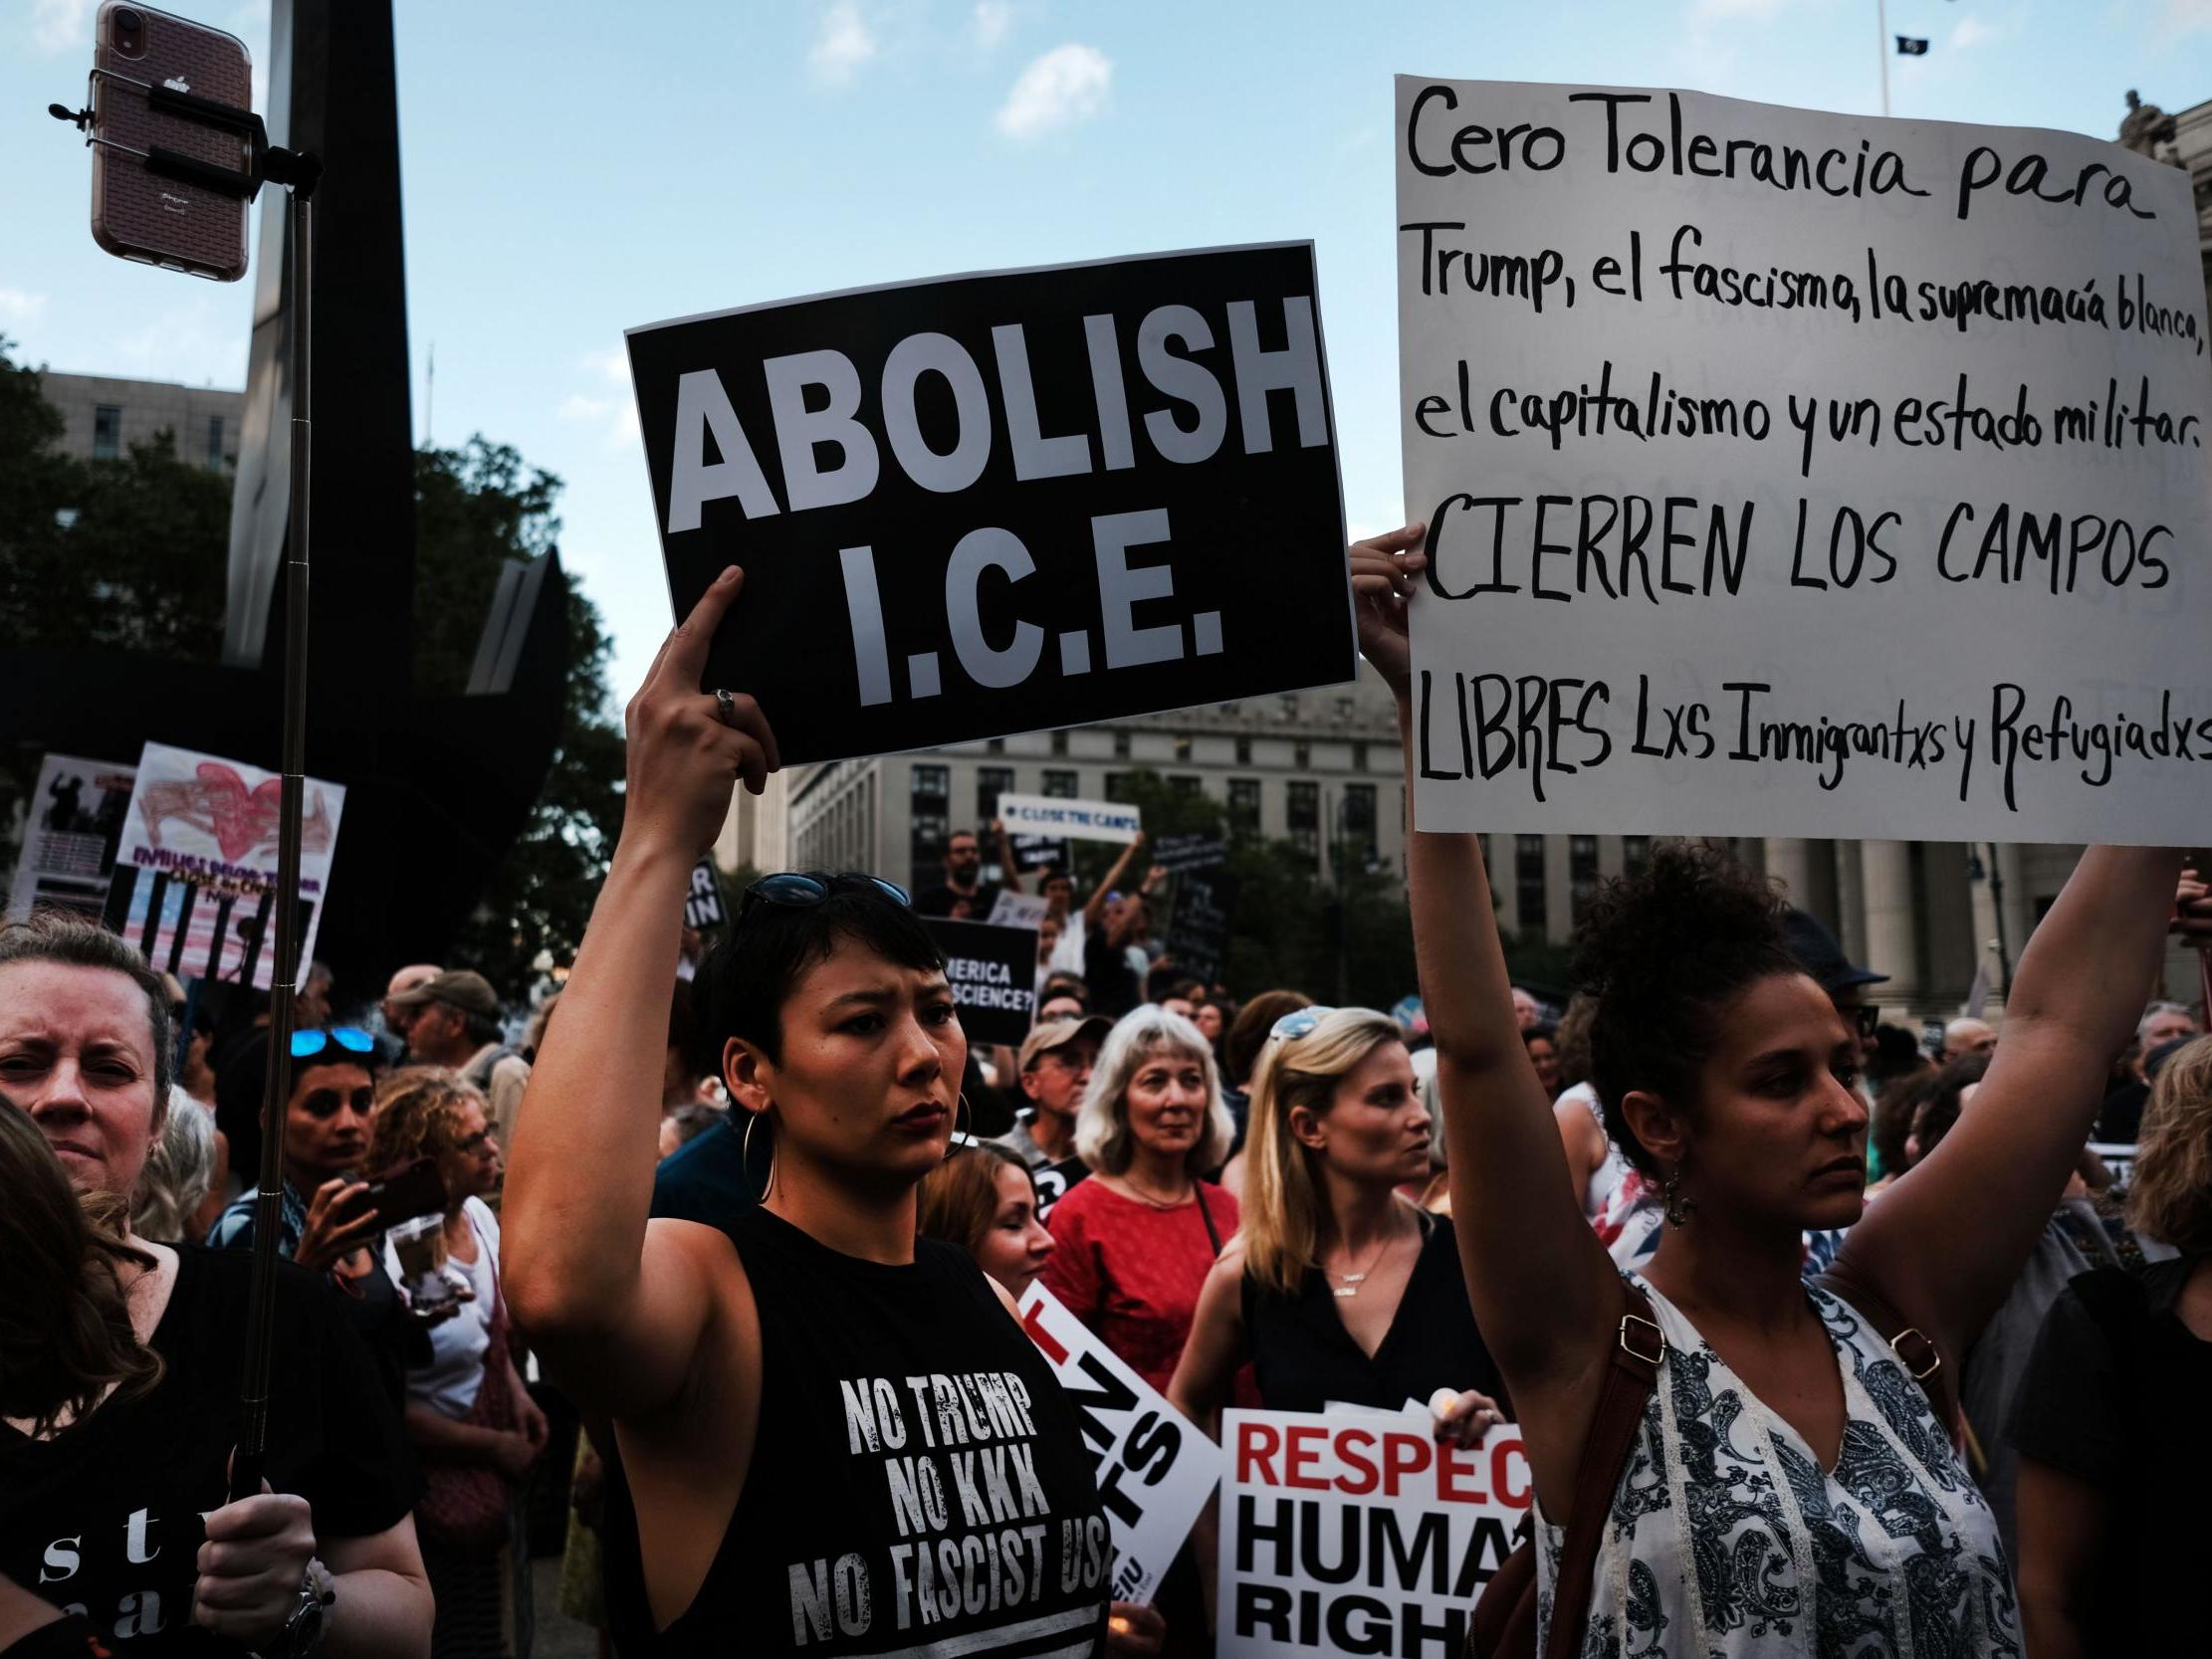 Hundreds of people gather in lower Manhattan for a ‘Lights for Liberty’ protest against migrant detention camps and impending raids by Immigration and Customs Enforcement in various cities on 12 July 12 2019